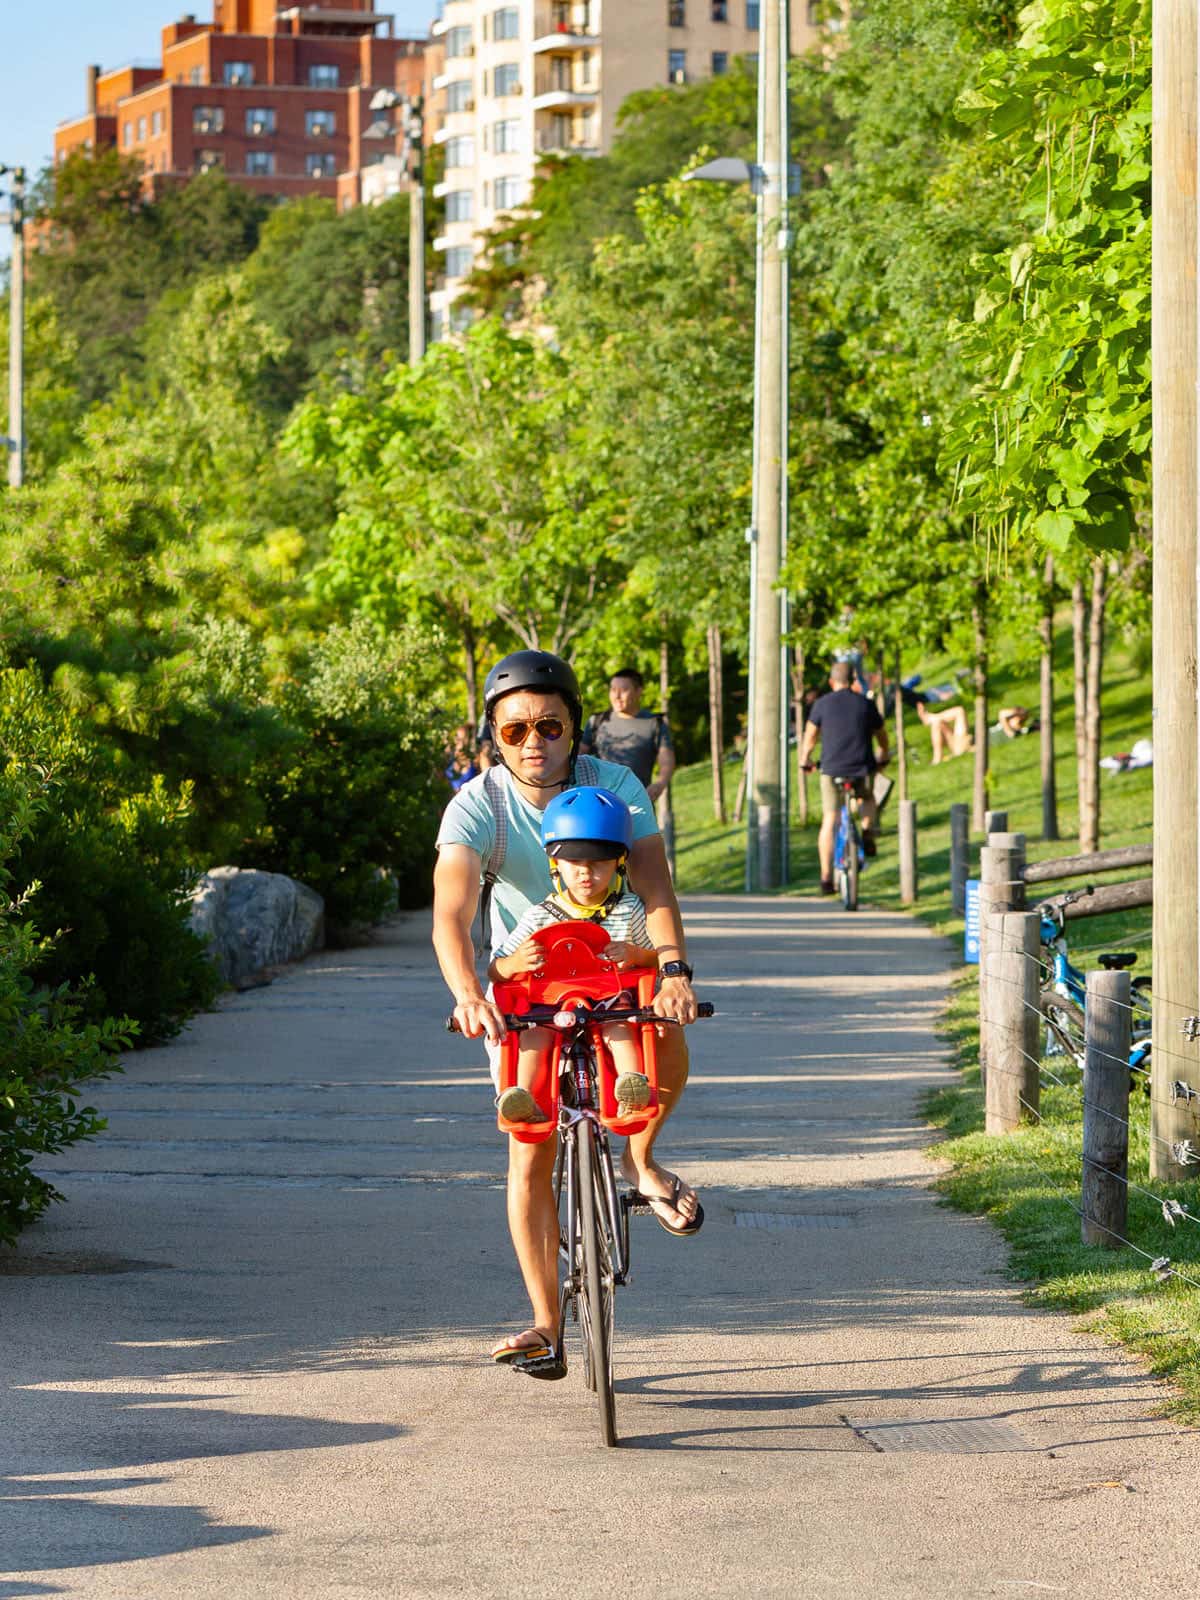 Close up of man biking down a path with a small child in a front mounted bike seat on a sunny day.